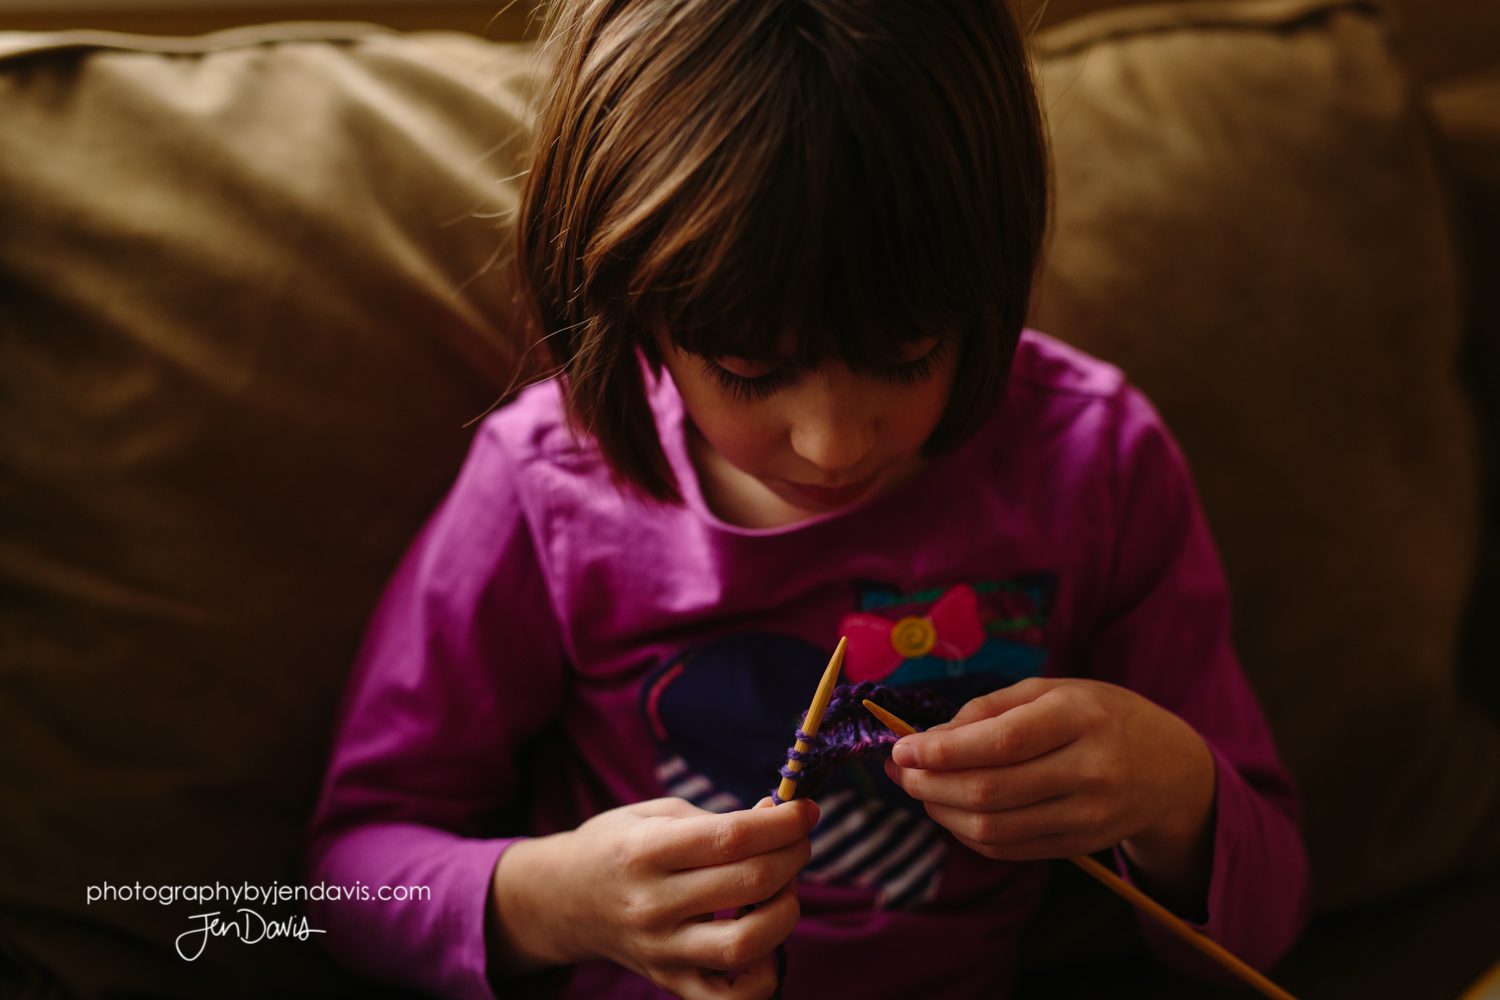 7 year old girl knitting indoors